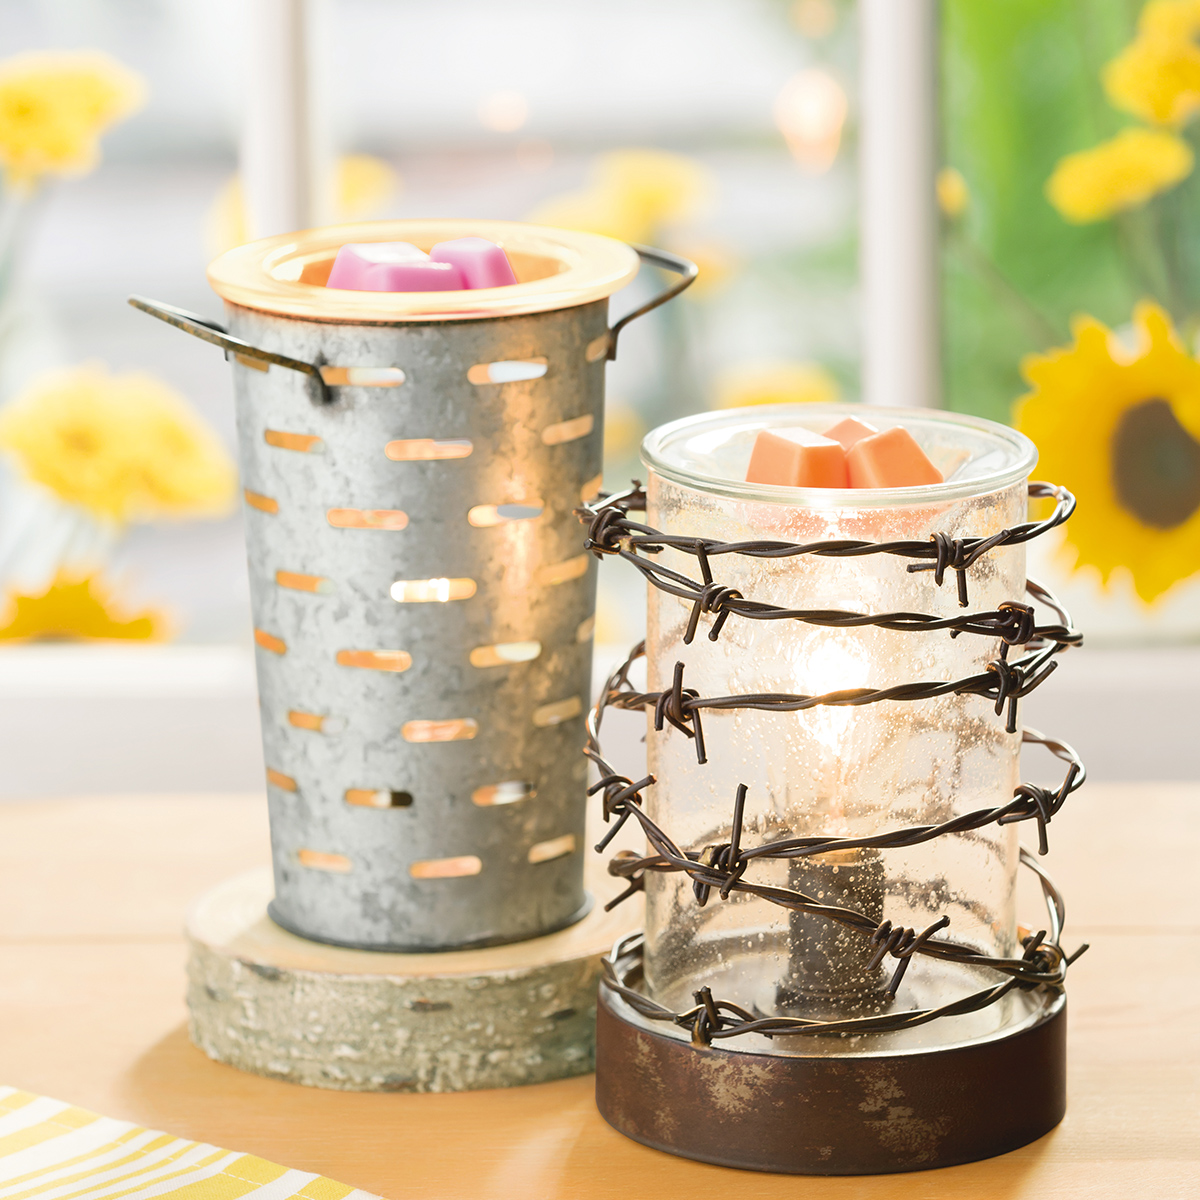 Rustic Ranch Scentsy Warmer | ScentsyÂ® Online Store. New Authentic